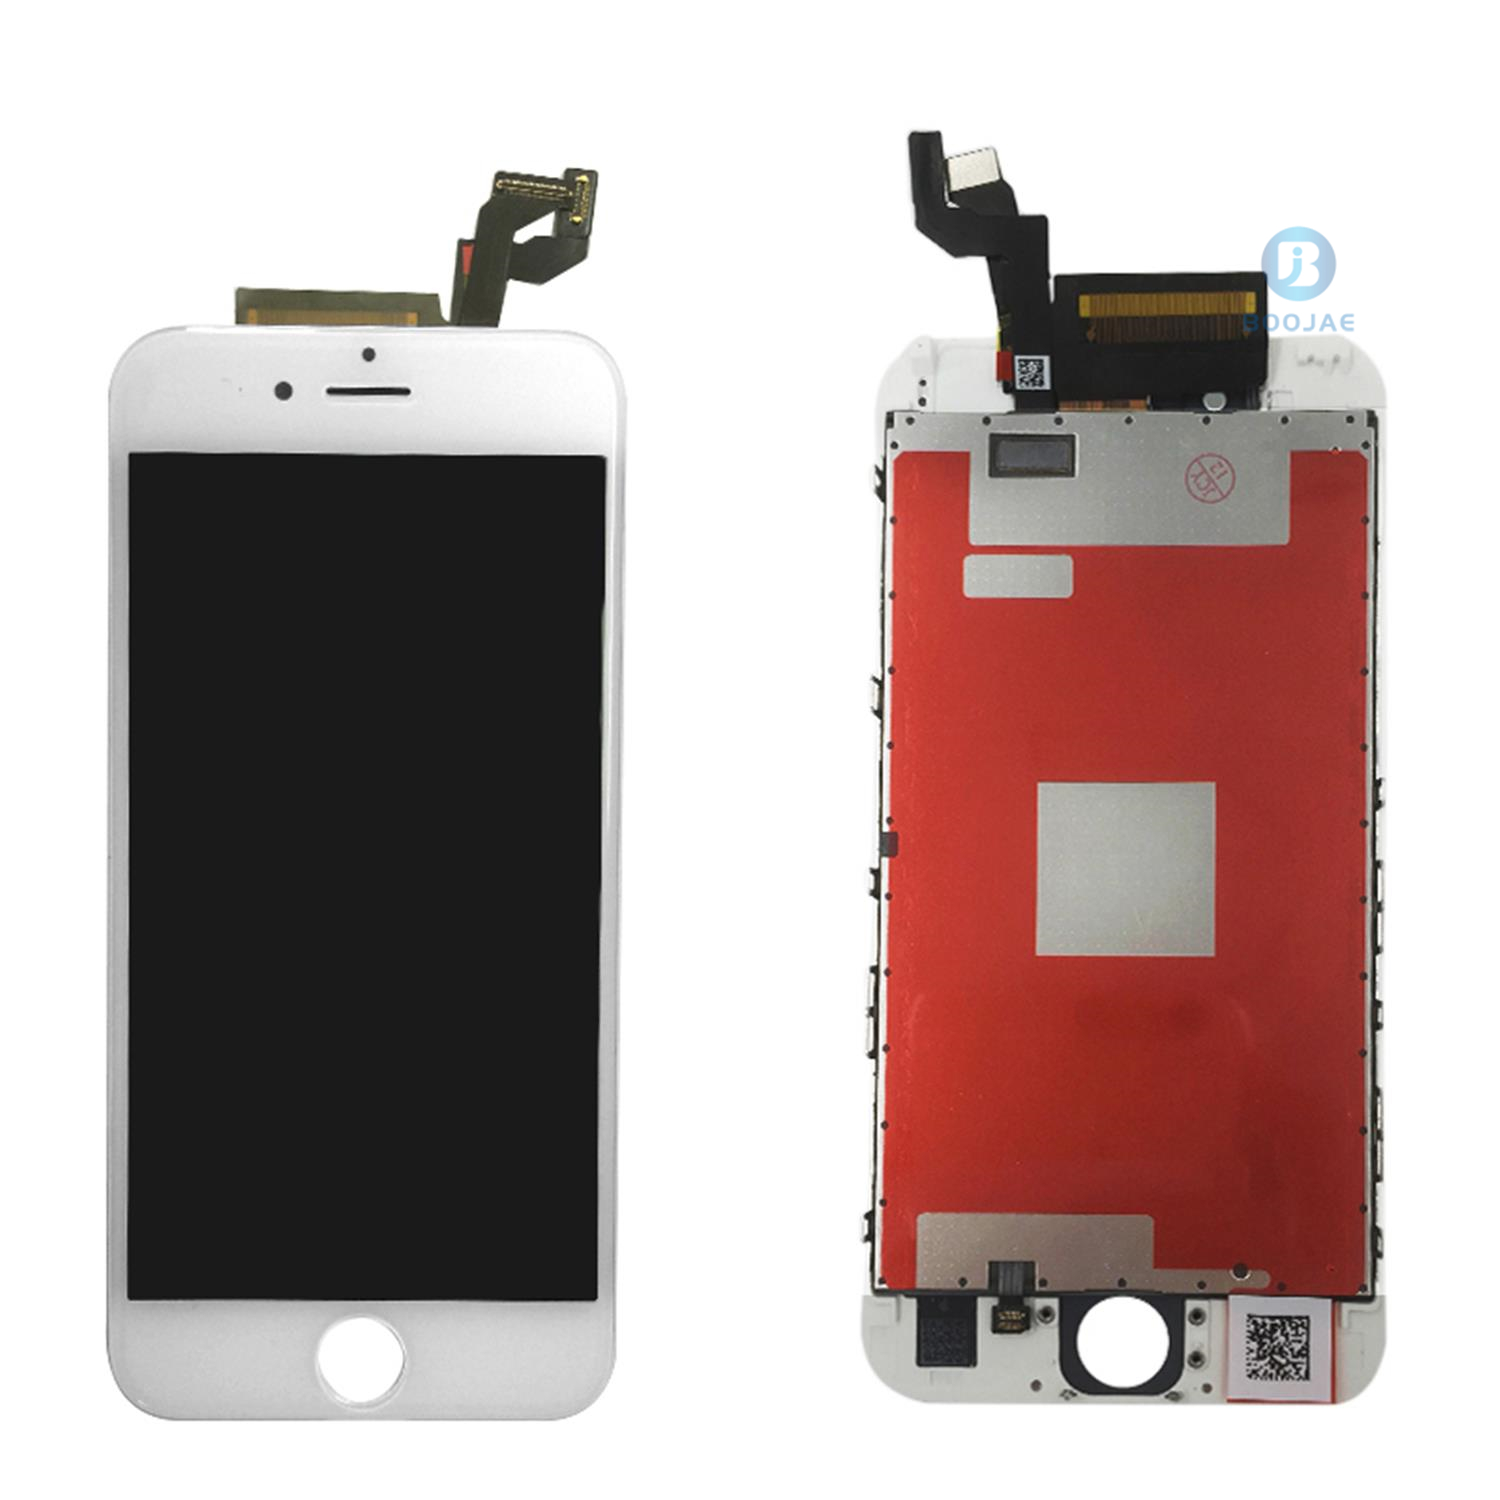 iPhone 6S LCD Screen Display and Wholesale iPhone Screens